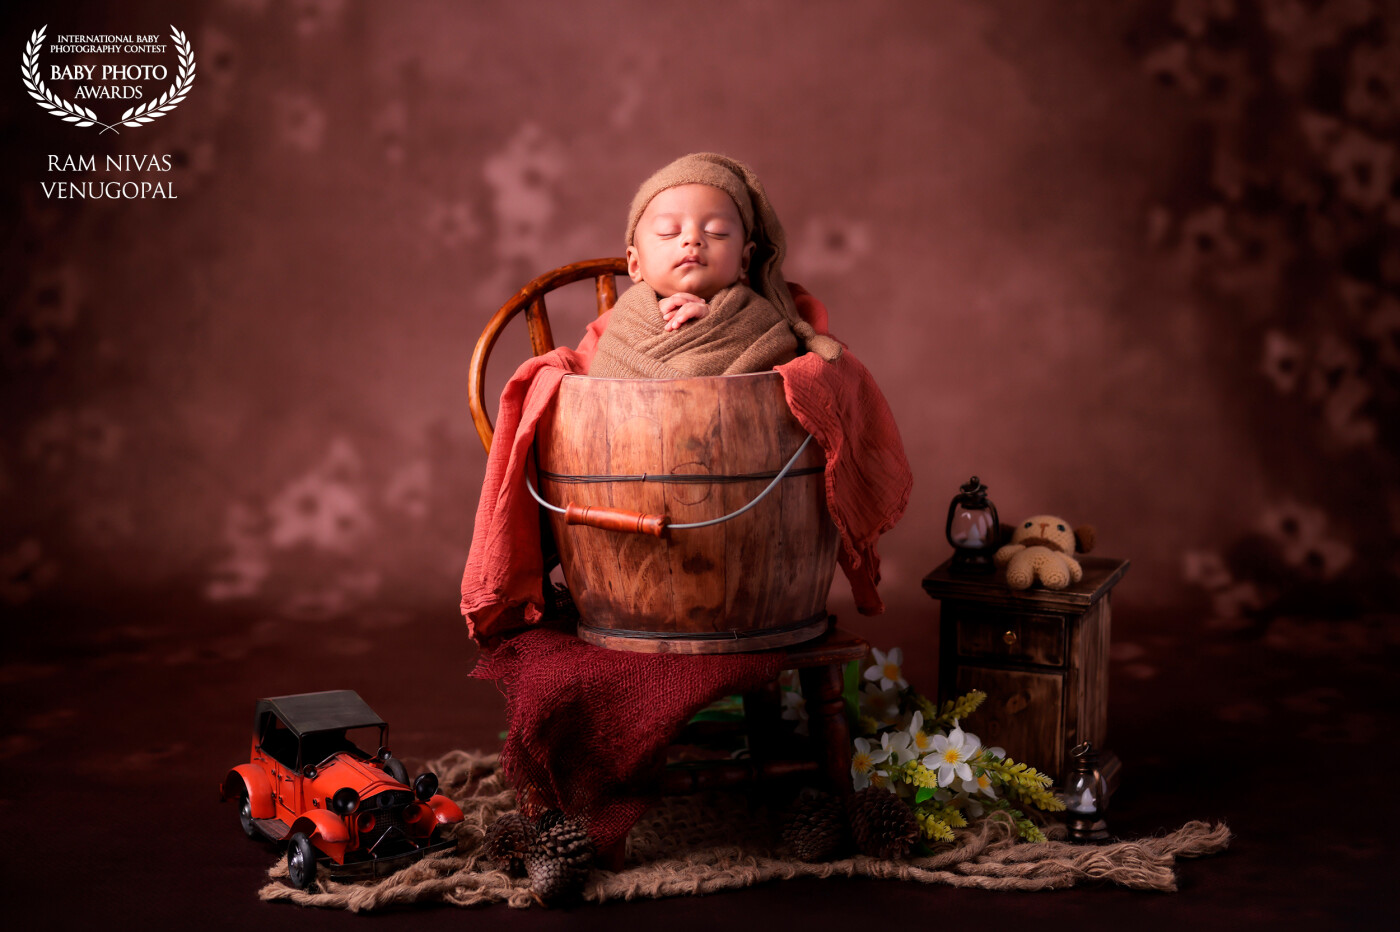 In a chiaroscuro of innocence and tranquility, this photograph showcases a sleeping newborn, delicately wrapped and cradled in a bowl on a chair. The image is enhanced by the playful interplay of shadows and light, highlighting the baby's peaceful features against a dark backdrop. Flanked by whimsical props including a small car, a lantern, flowers, and a woven toy, the composition creates a serene tableau, beautifully juxtaposing the vibrant infancy against the quietude of the setting.